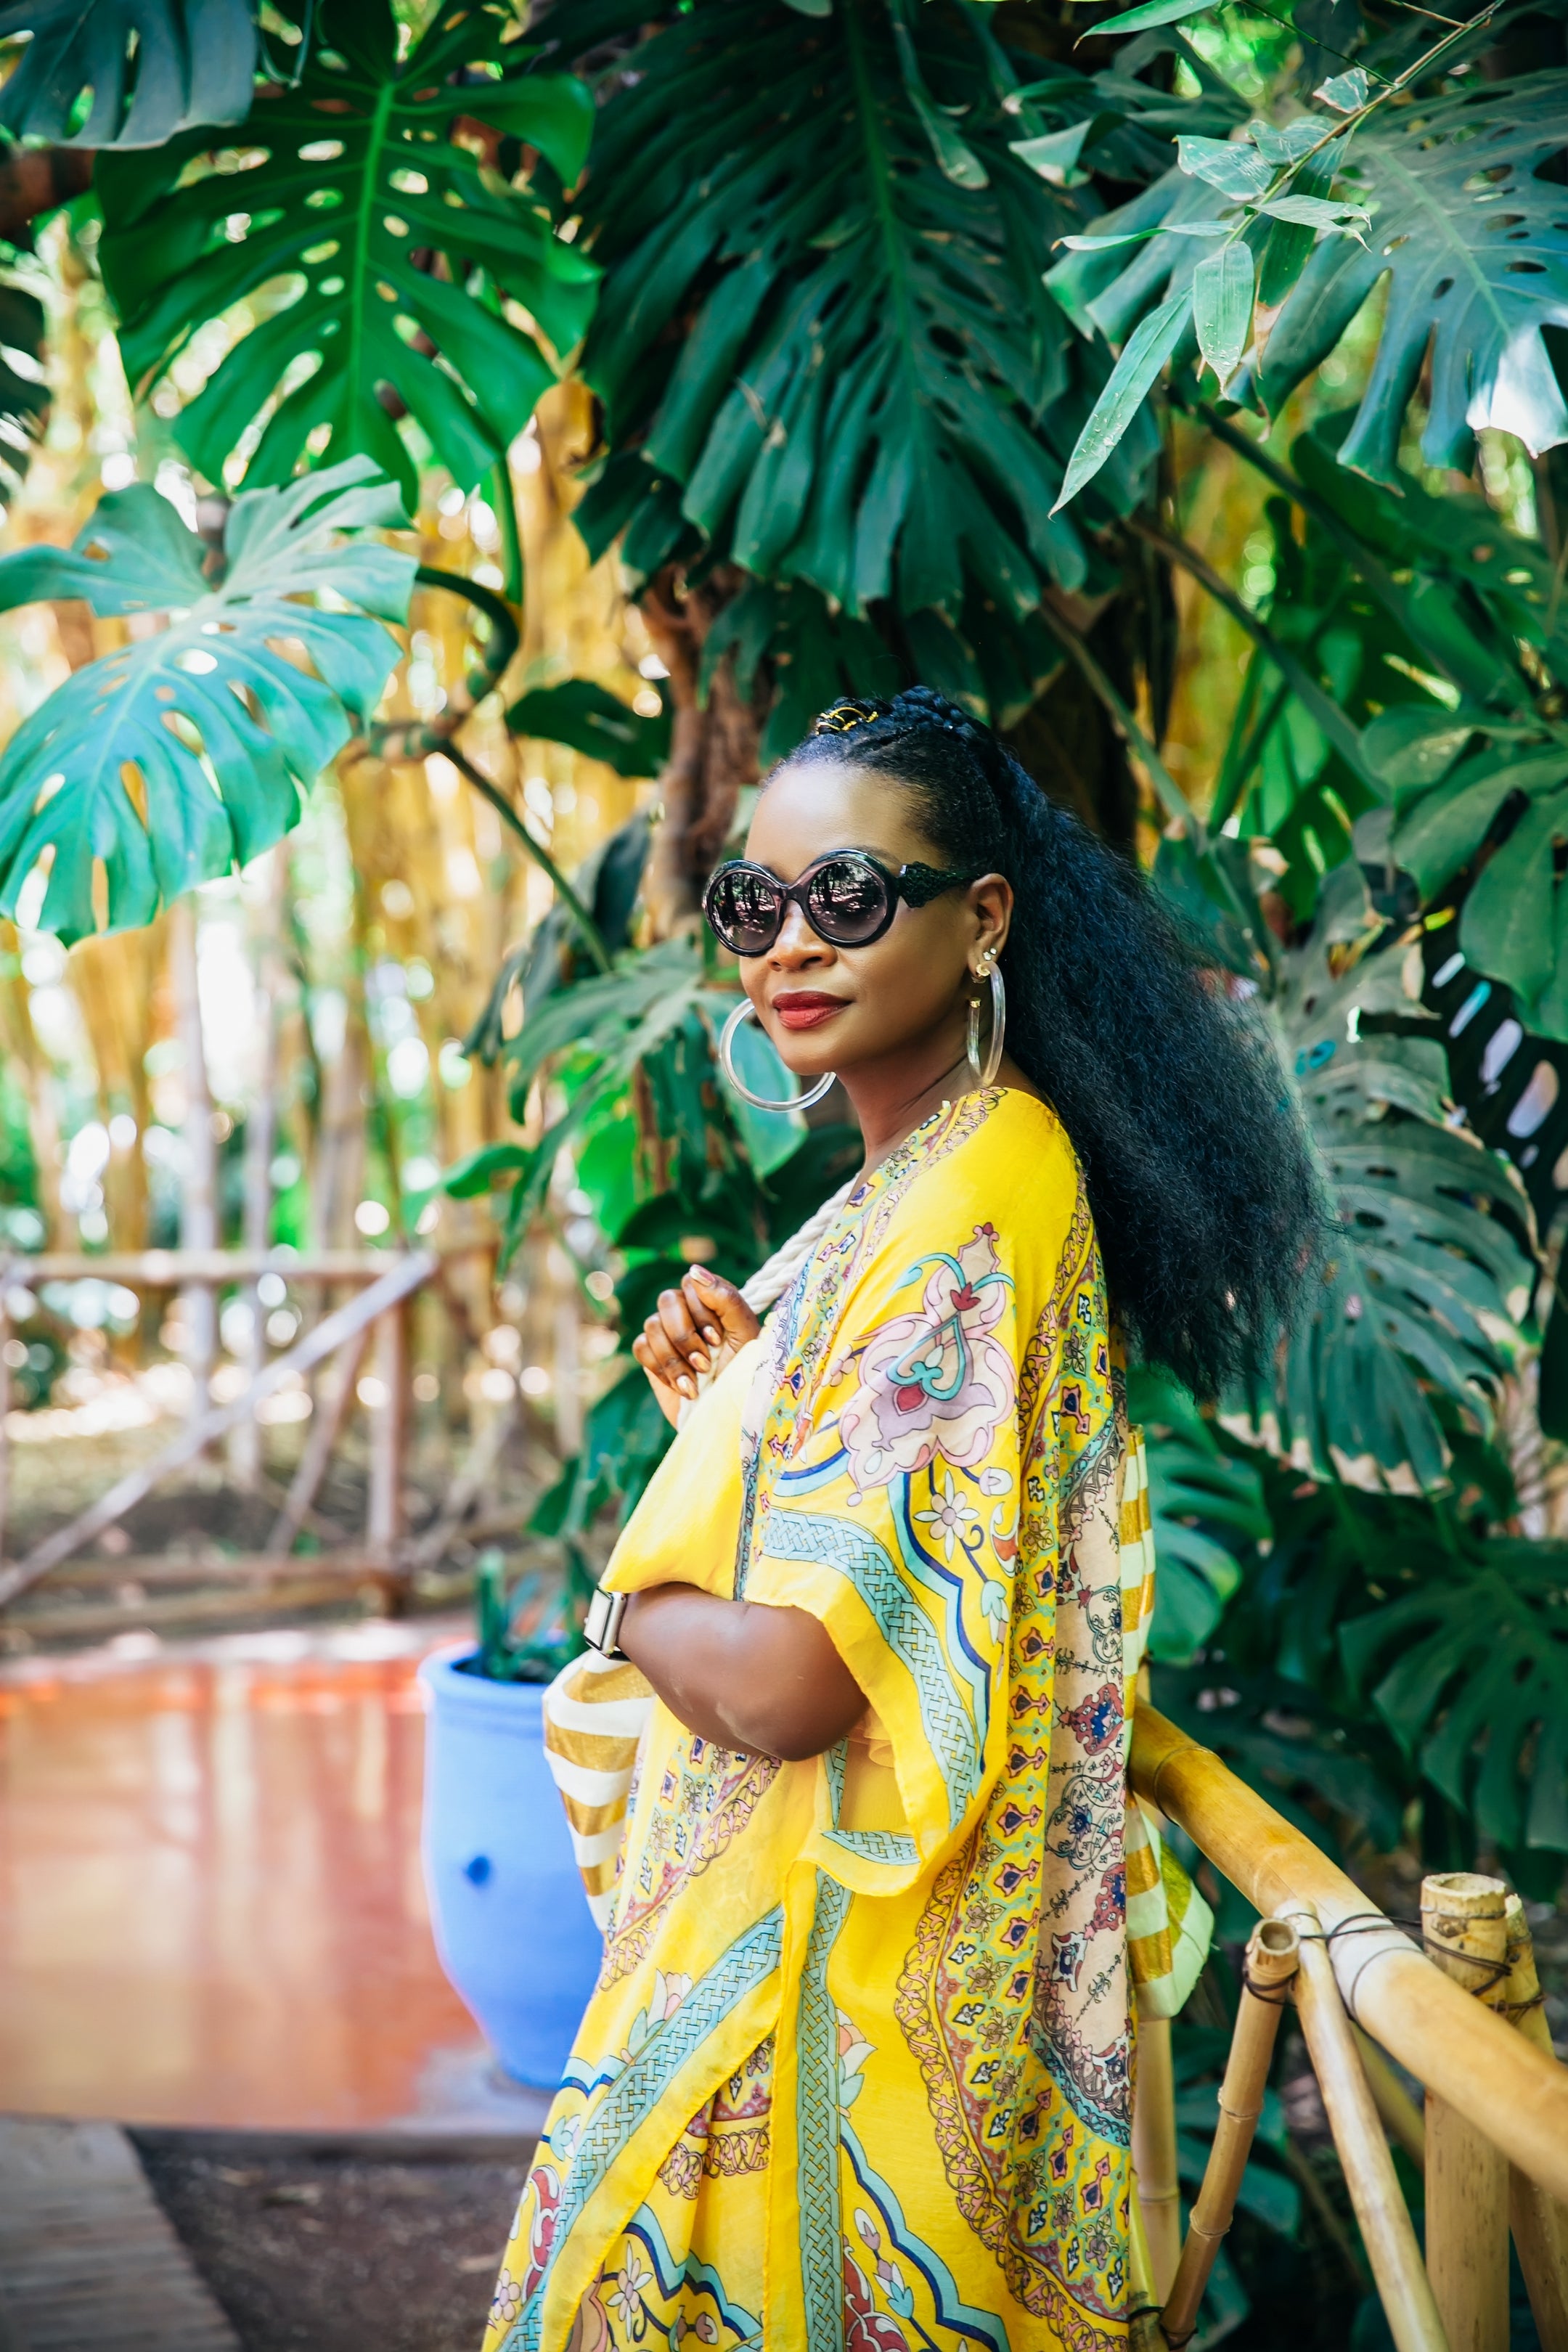 Jet-setters Share Their Trusted Black Travel Businesses And Why You'll Love Them Too